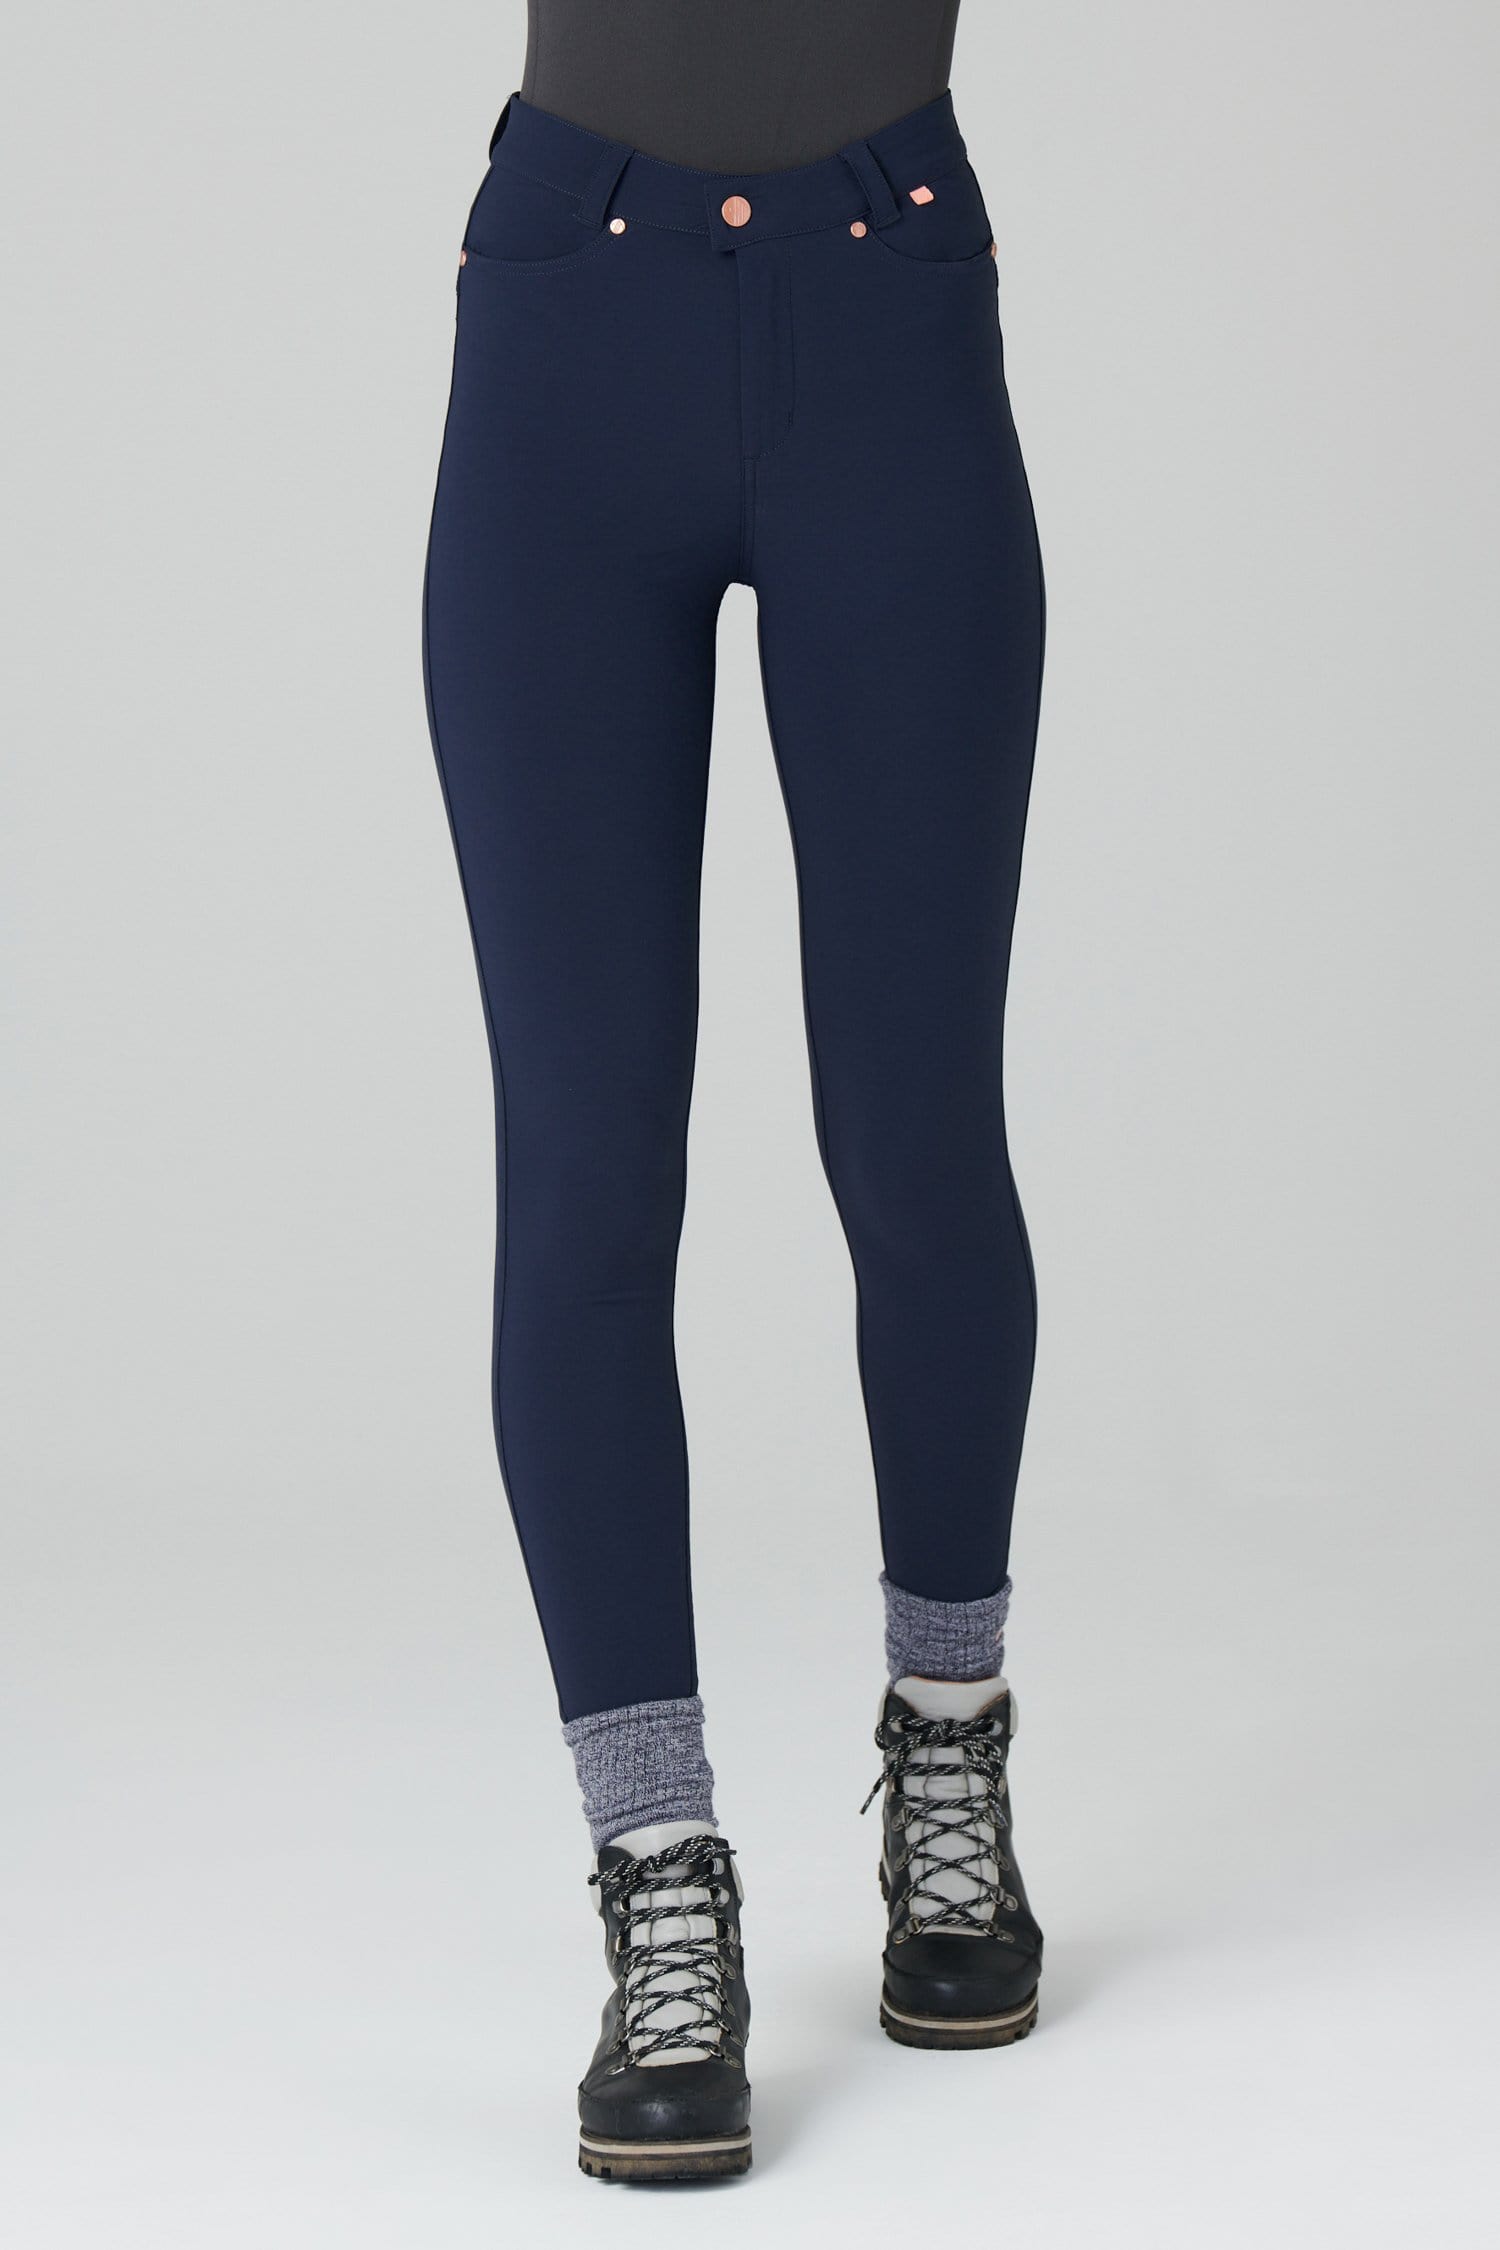 Max Stretch Skinny Outdoor Trousers - Deep Navy - 36r / Uk18 - Womens - Acai Outdoorwear